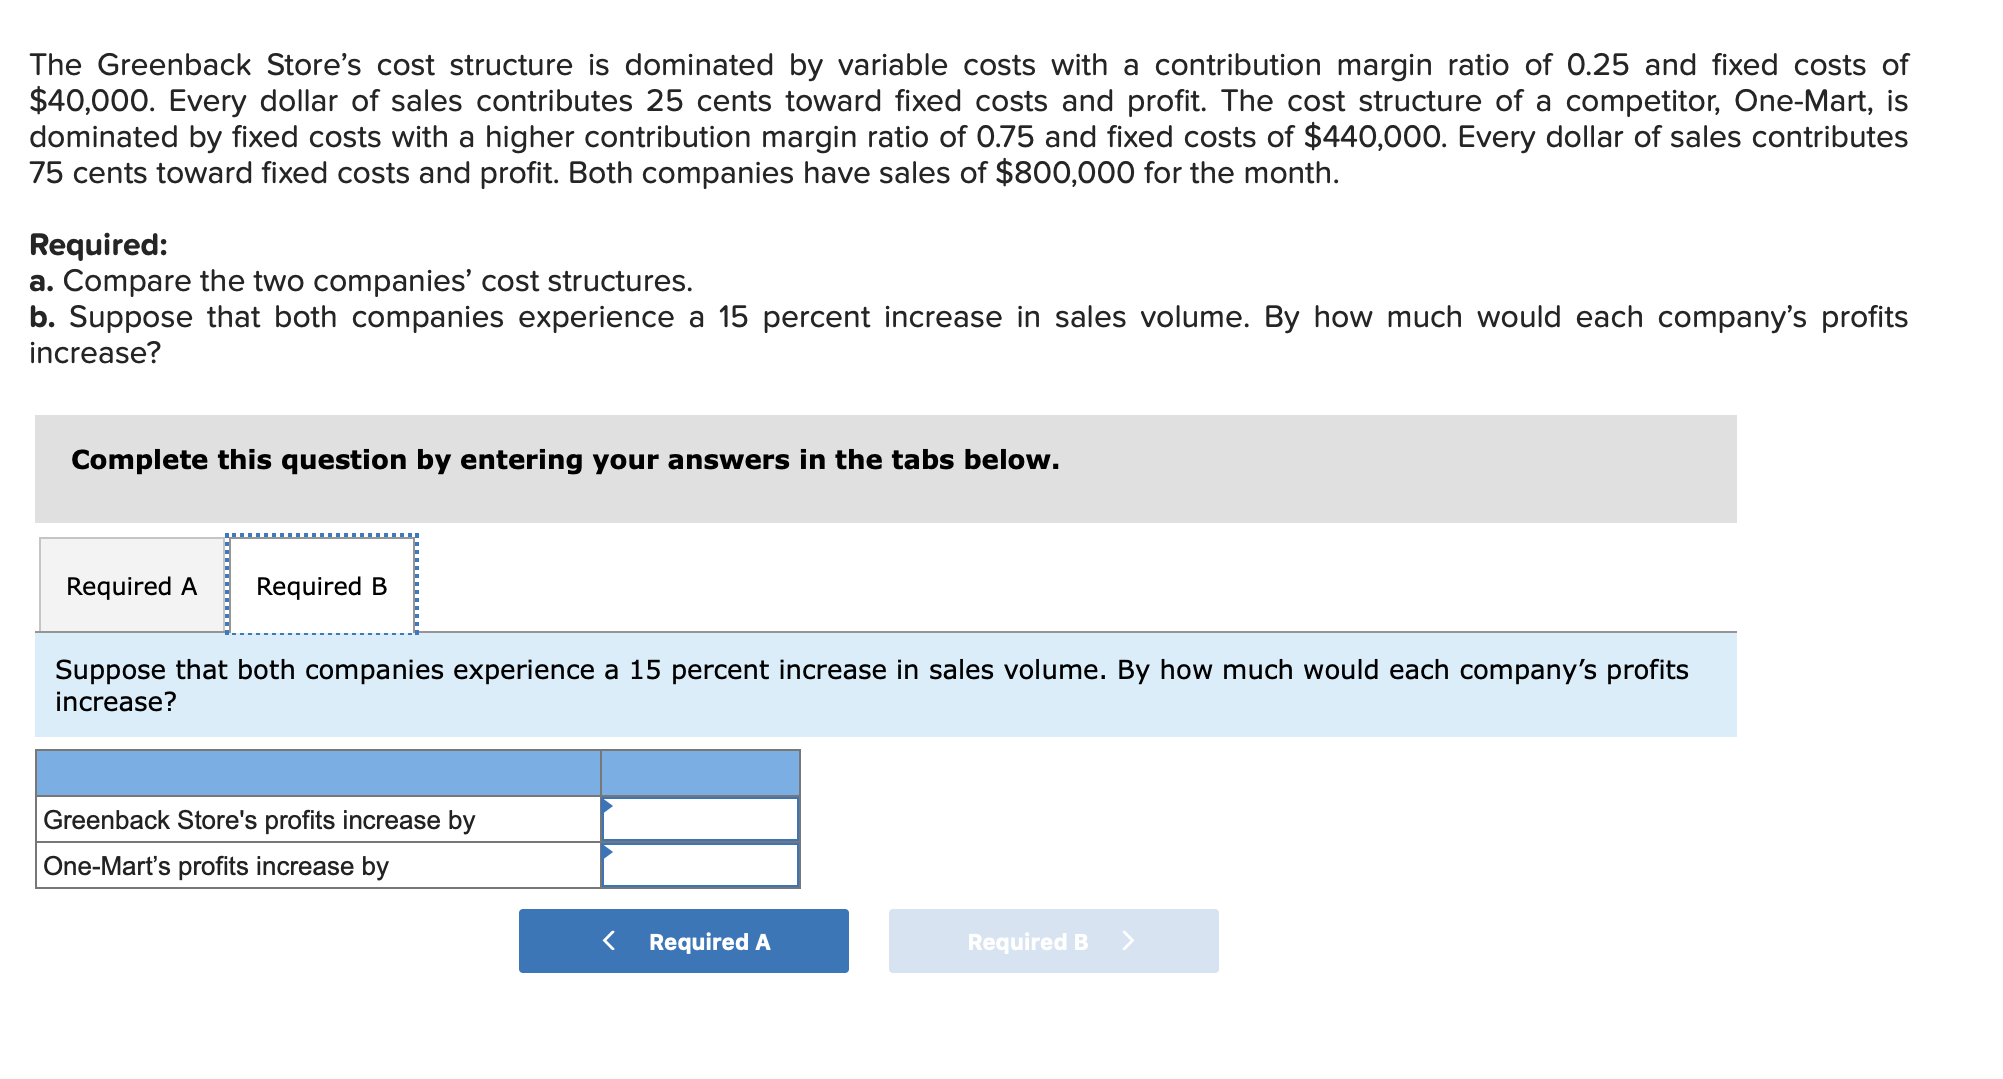 The Greenback Store's cost structure is dominated by variable costs with a contribution margin ratio of 0.25 and fixed costs of
$40,000. Every dollar of sales contributes 25 cents toward fixed costs and profit. The cost structure of a competitor, One-Mart, is
dominated by fixed costs with a higher contribution margin ratio of 0.75 and fixed costs of $440,000. Every dollar of sales contributes
75 cents toward fixed costs and profit. Both companies have sales of $800,000 for the month.
Required:
a. Compare the two companies' cost structures.
b. Suppose that both companies experience a 15 percent increase in sales volume. By how much would each company's profits
increase?
